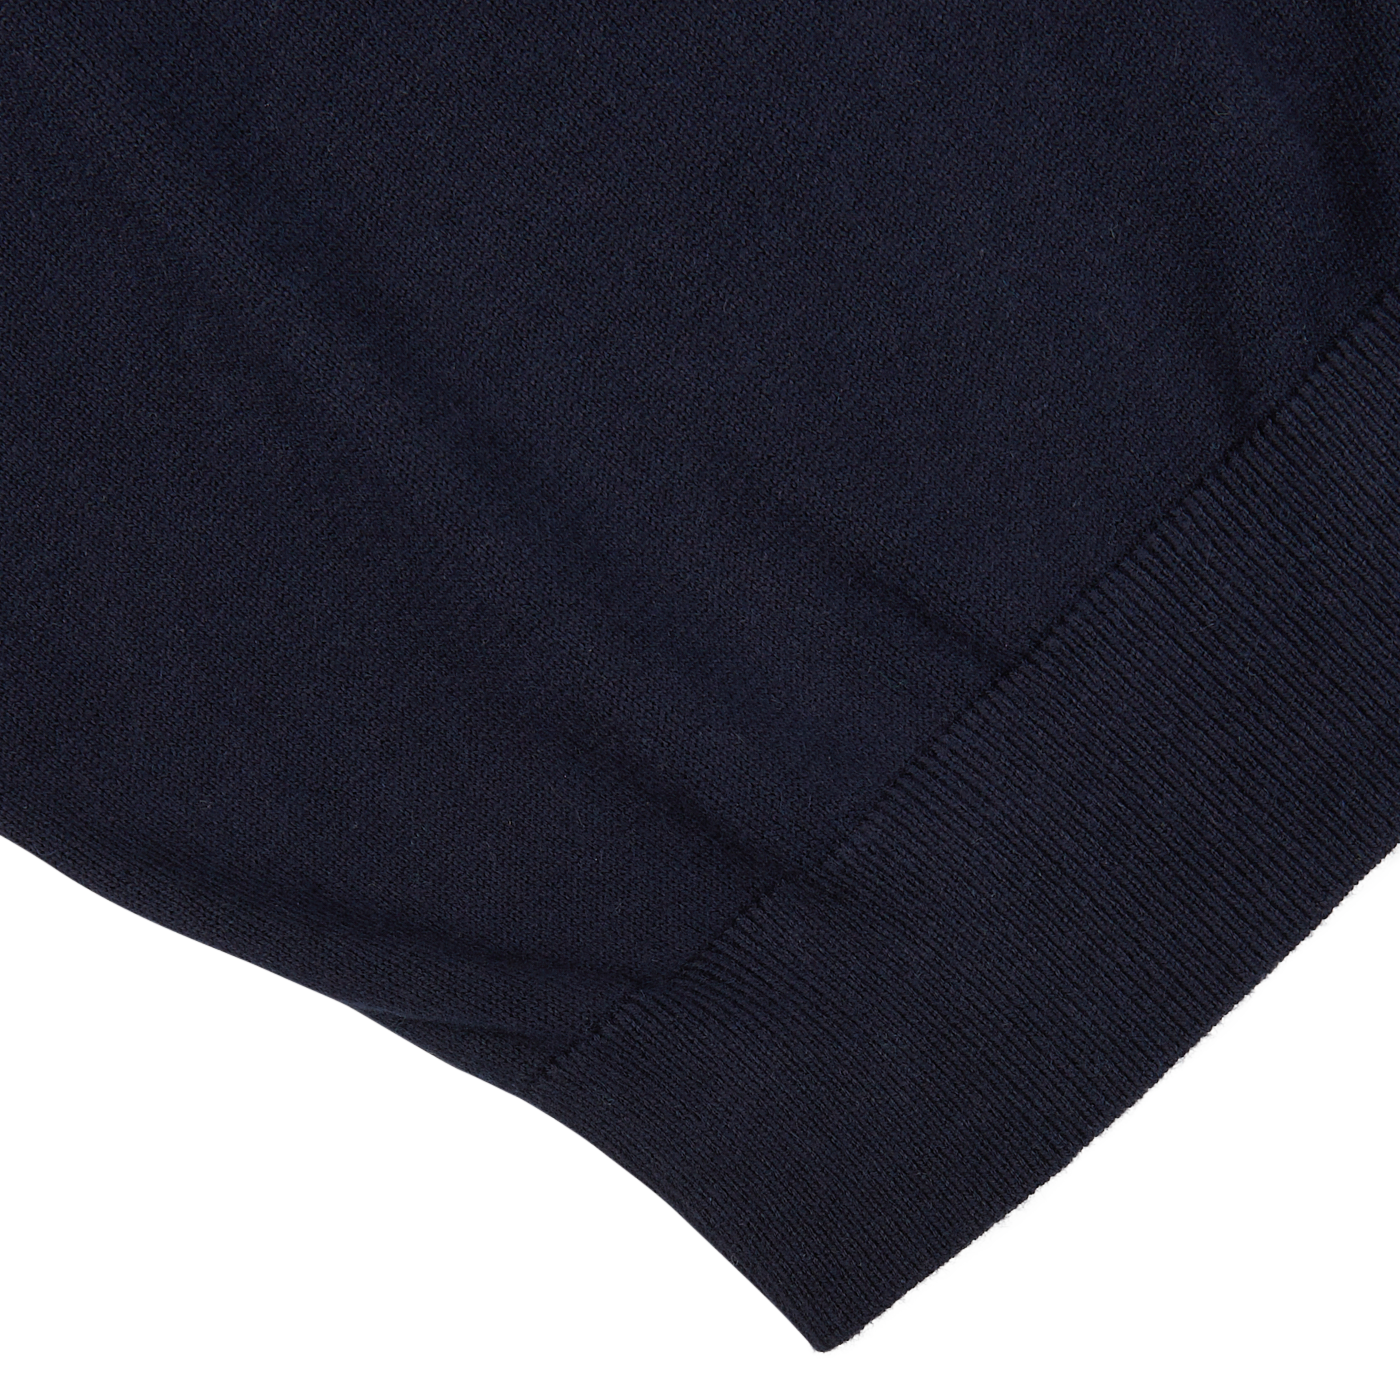 Close-up of the hem and fabric texture of a dark blue, Alan Paine luxury cotton cashmere summer v-neck sweater.